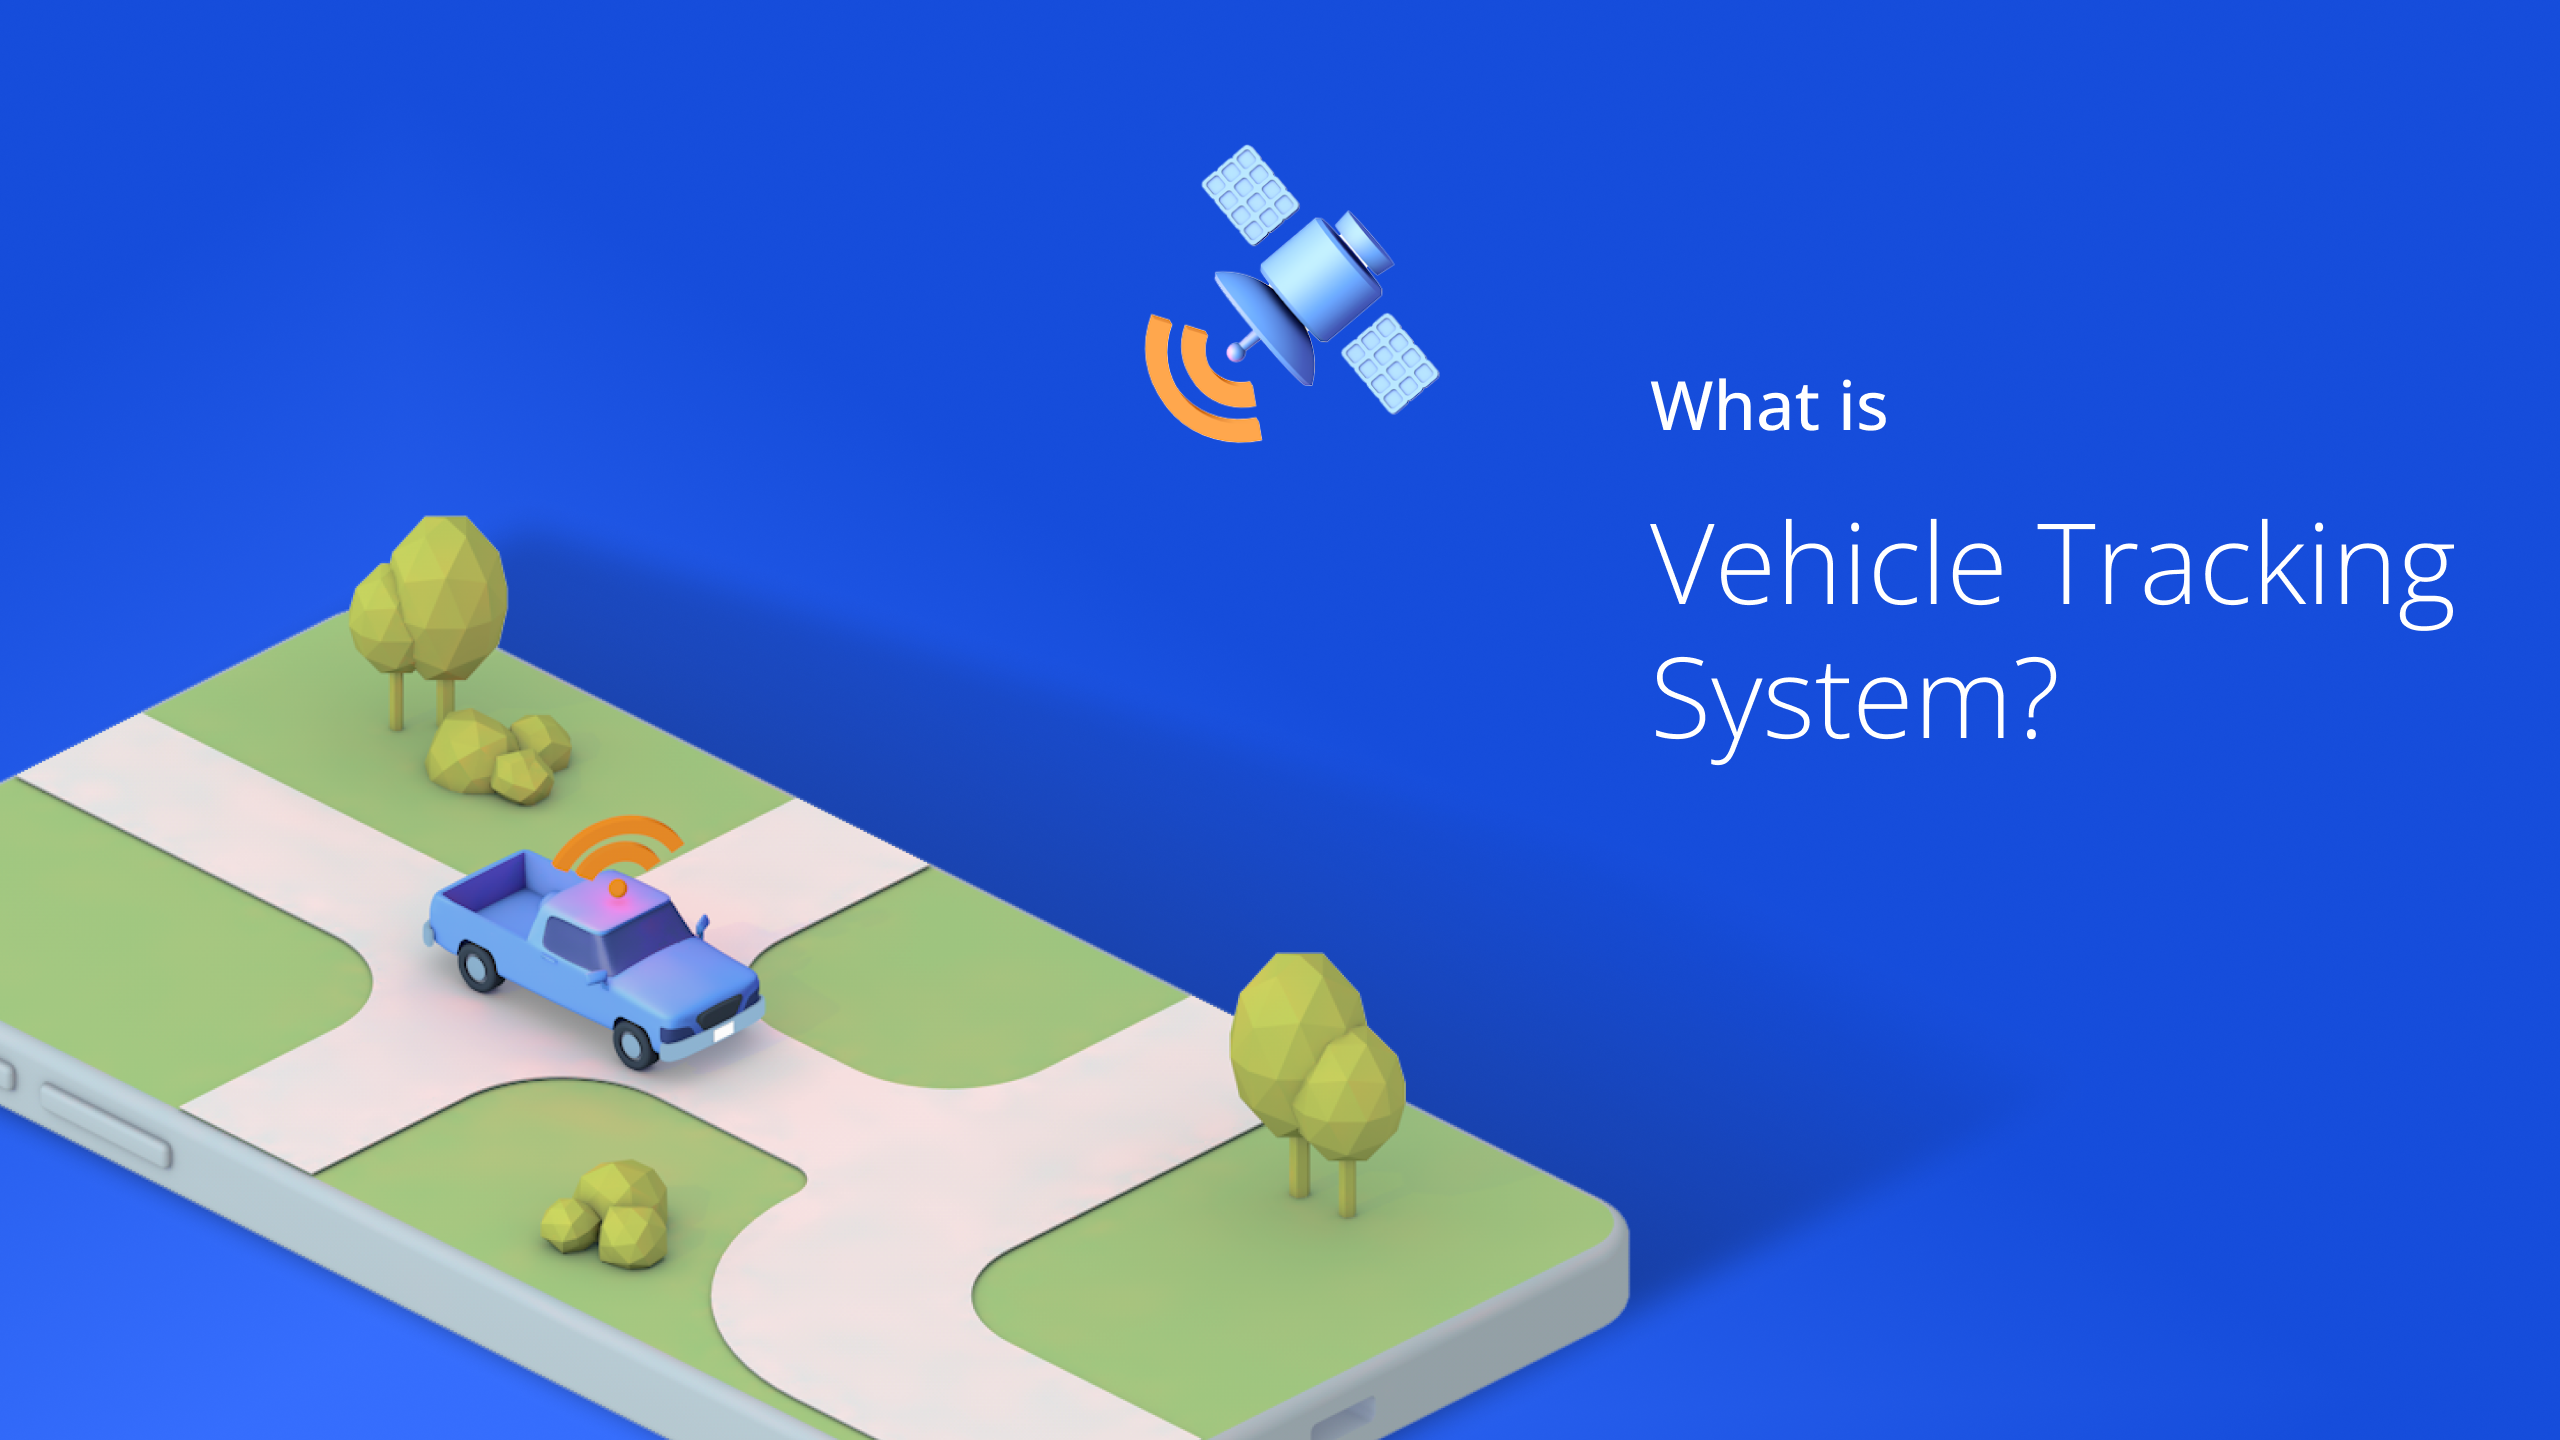 Image showing how a vehicle tracking system works